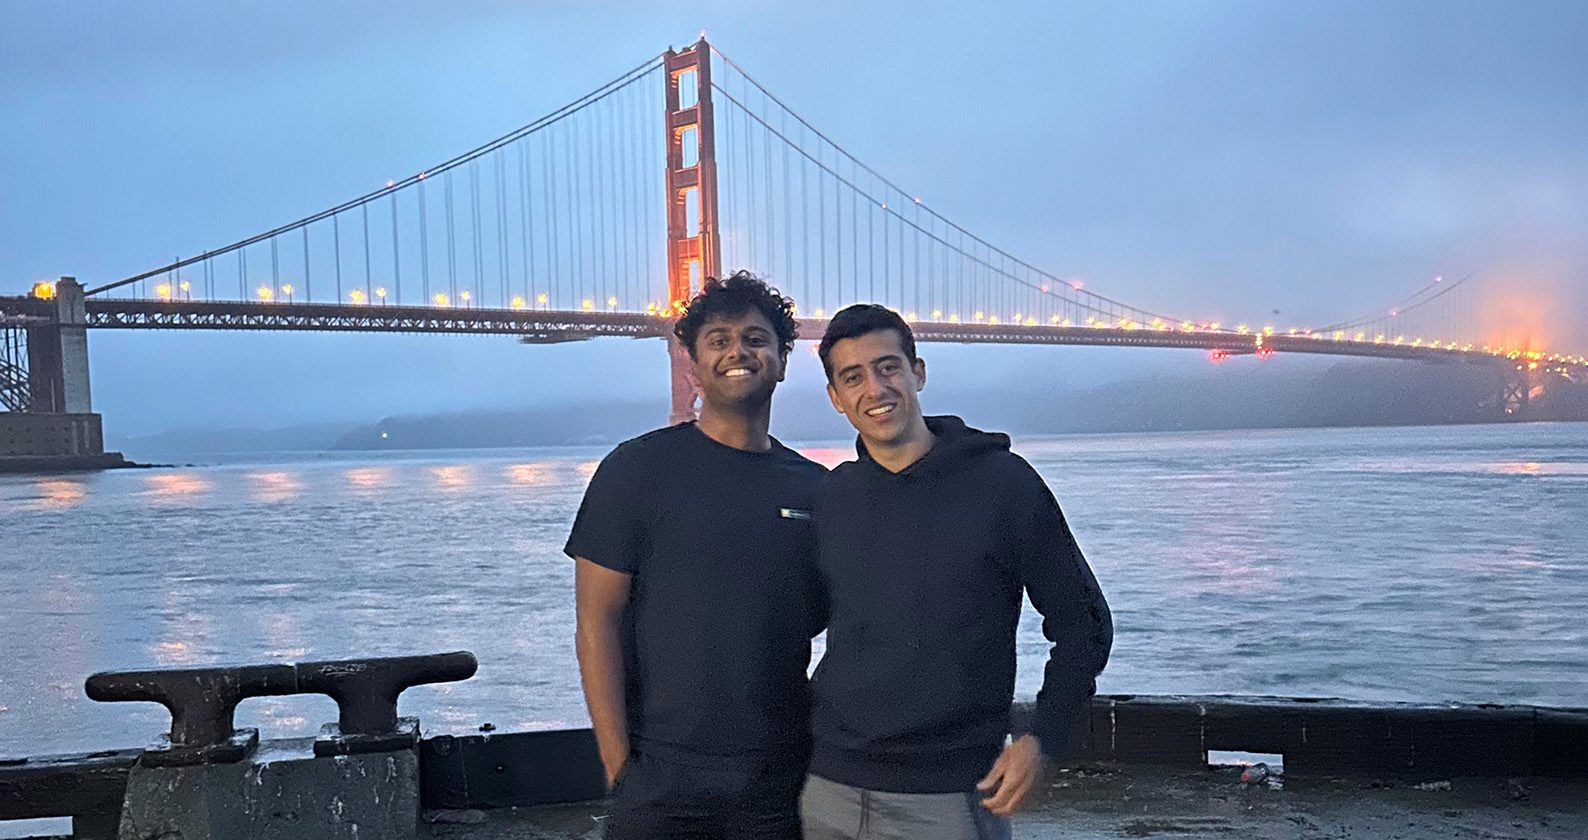 Melvin Tom and a friend in front of the Golden Gate Bridge.